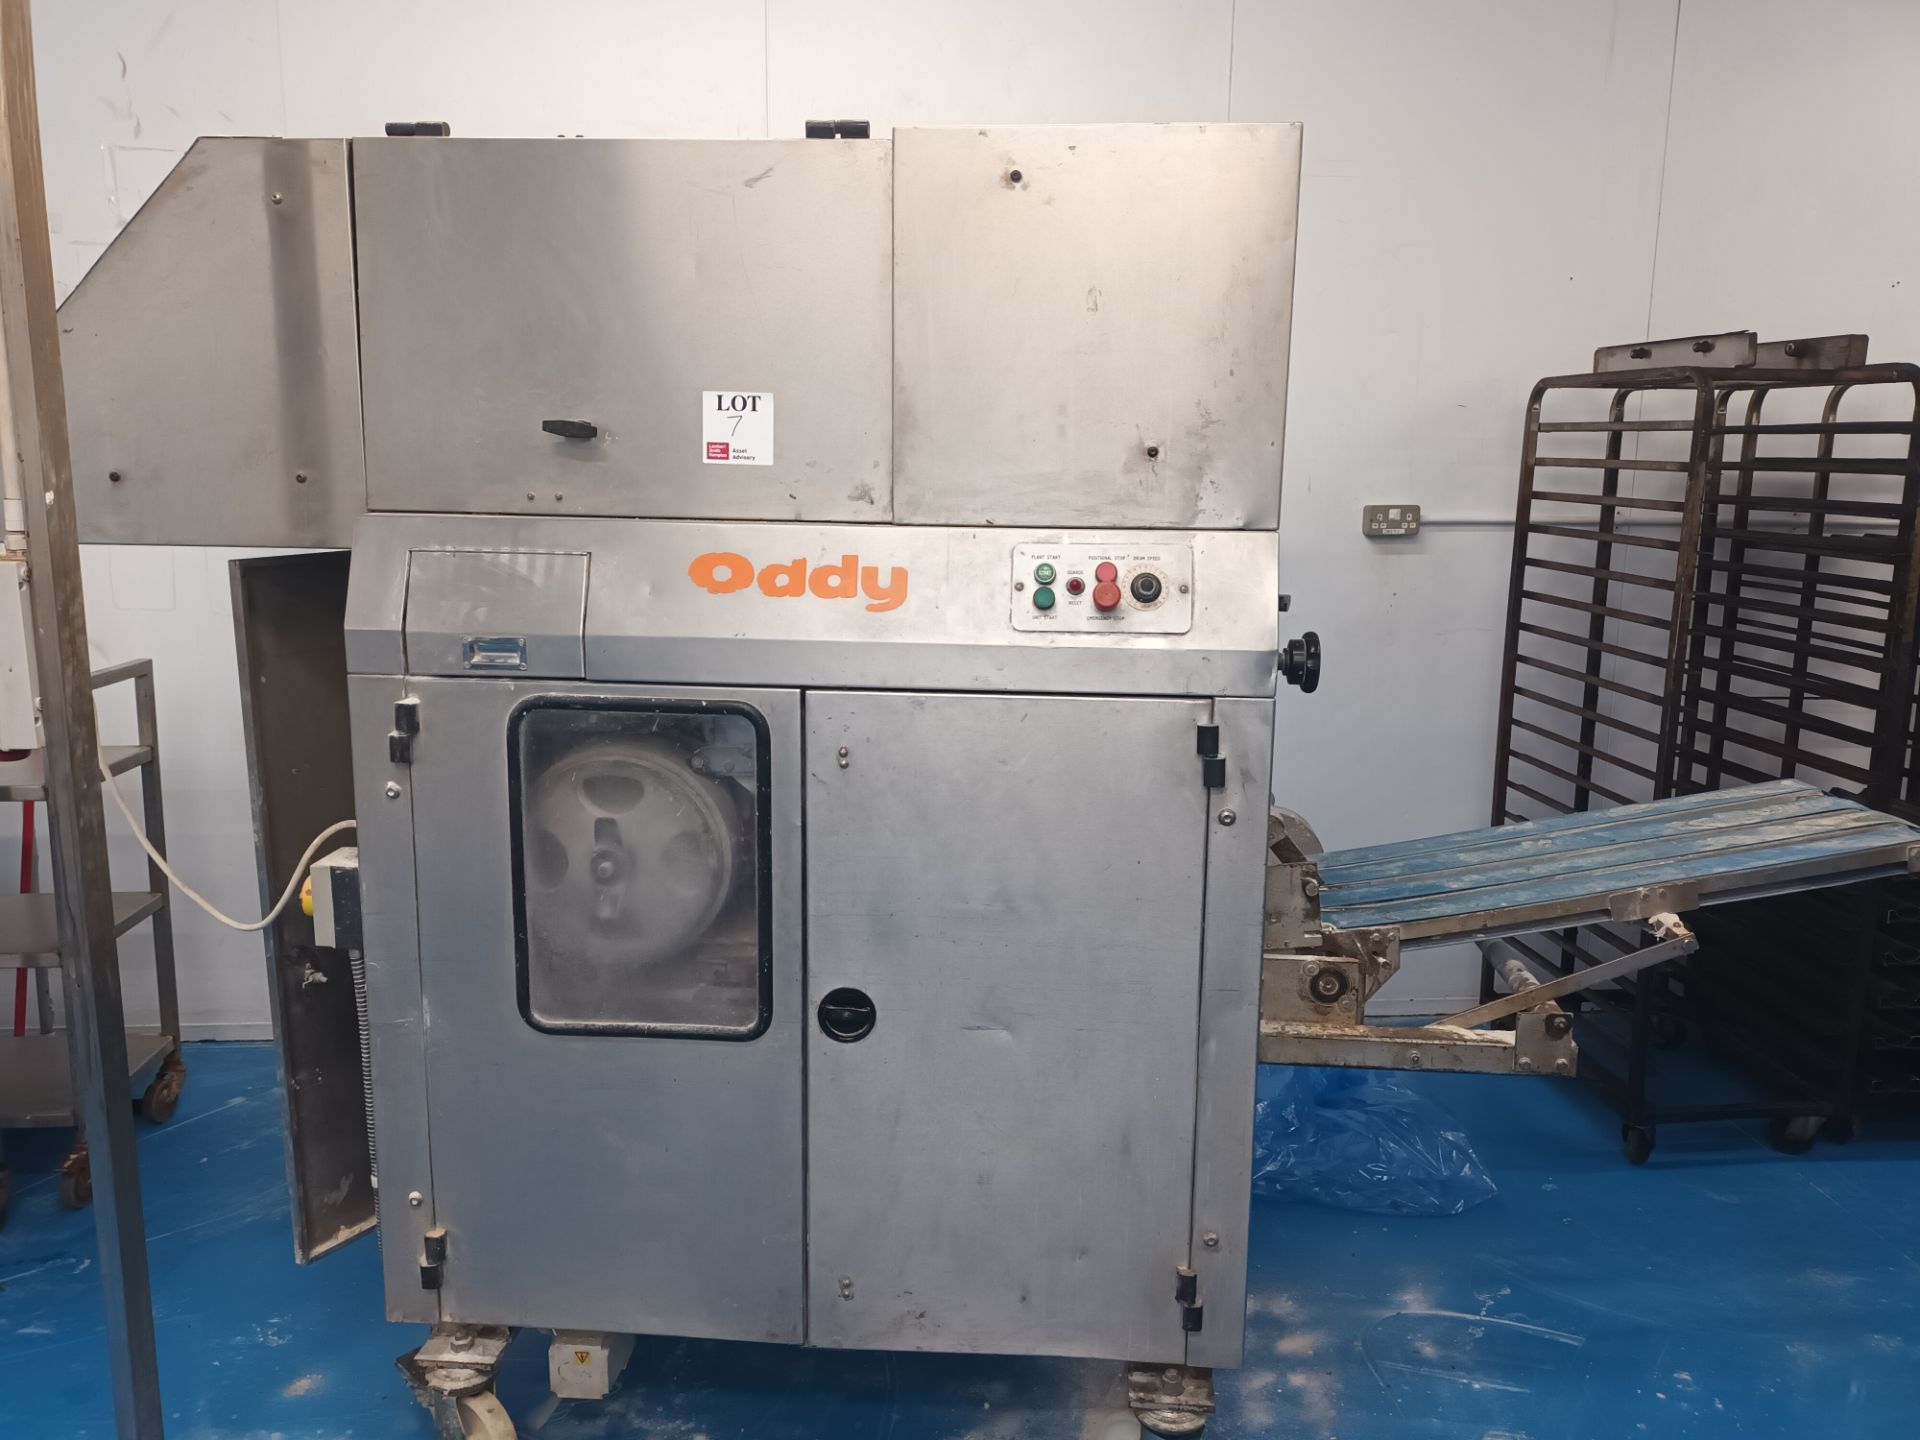 Oddy roll plant with pinner feeder line